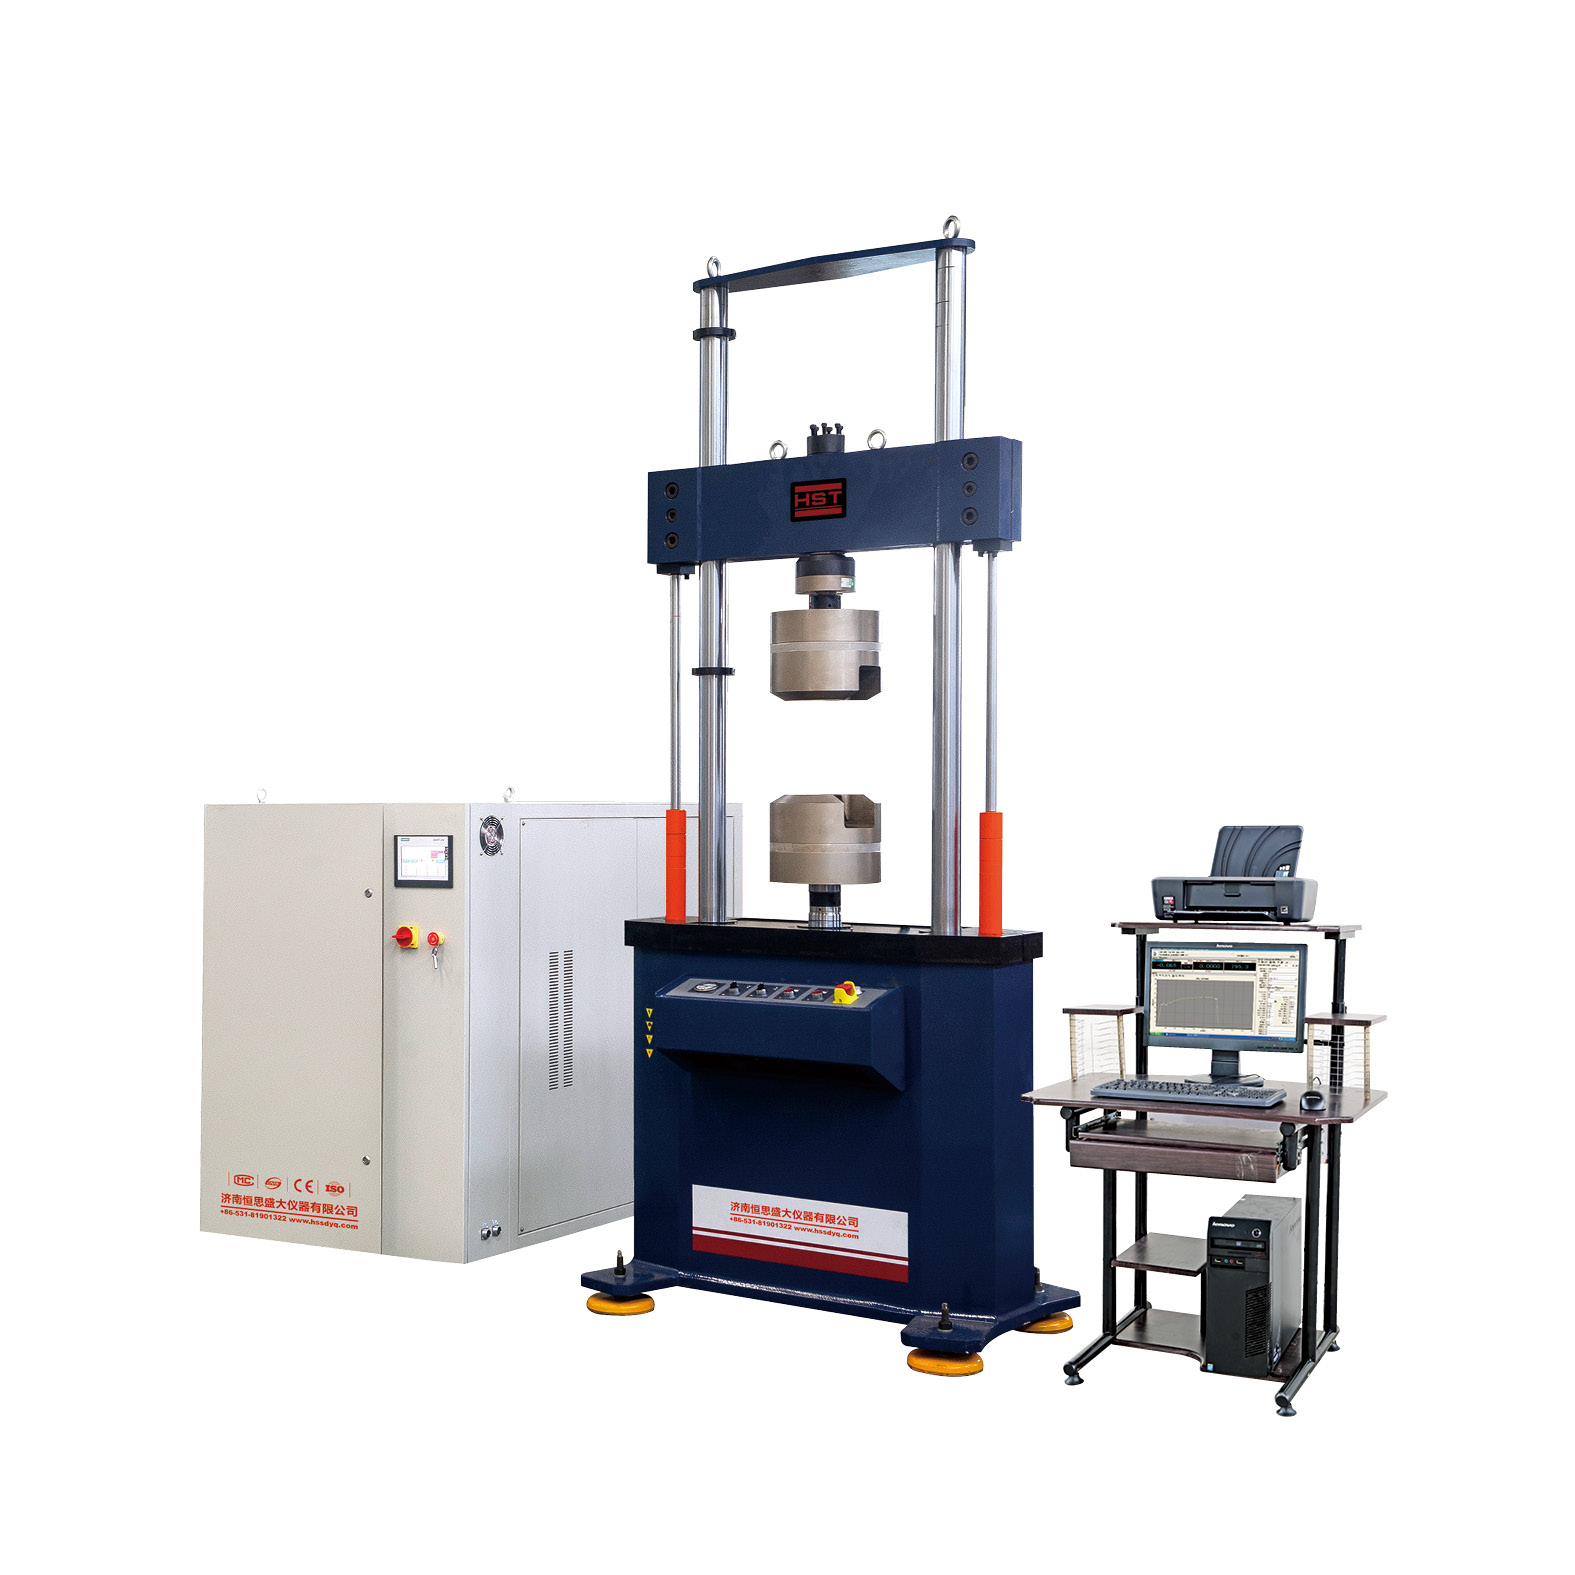 Electromagnetic resonance type high frequency fatigue testing machine